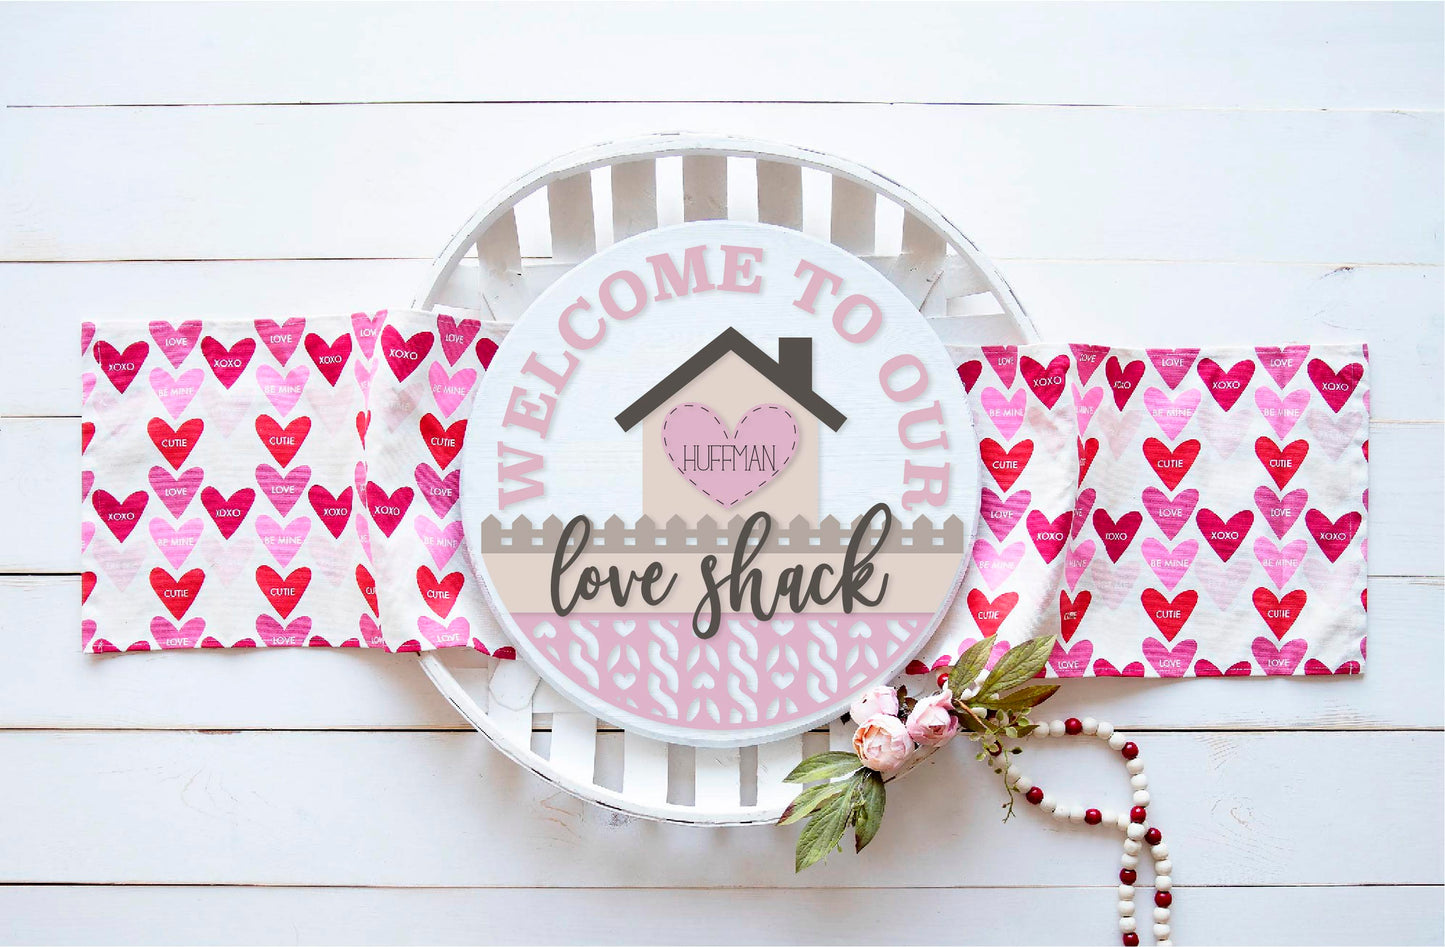 Welcome to our love shack sign